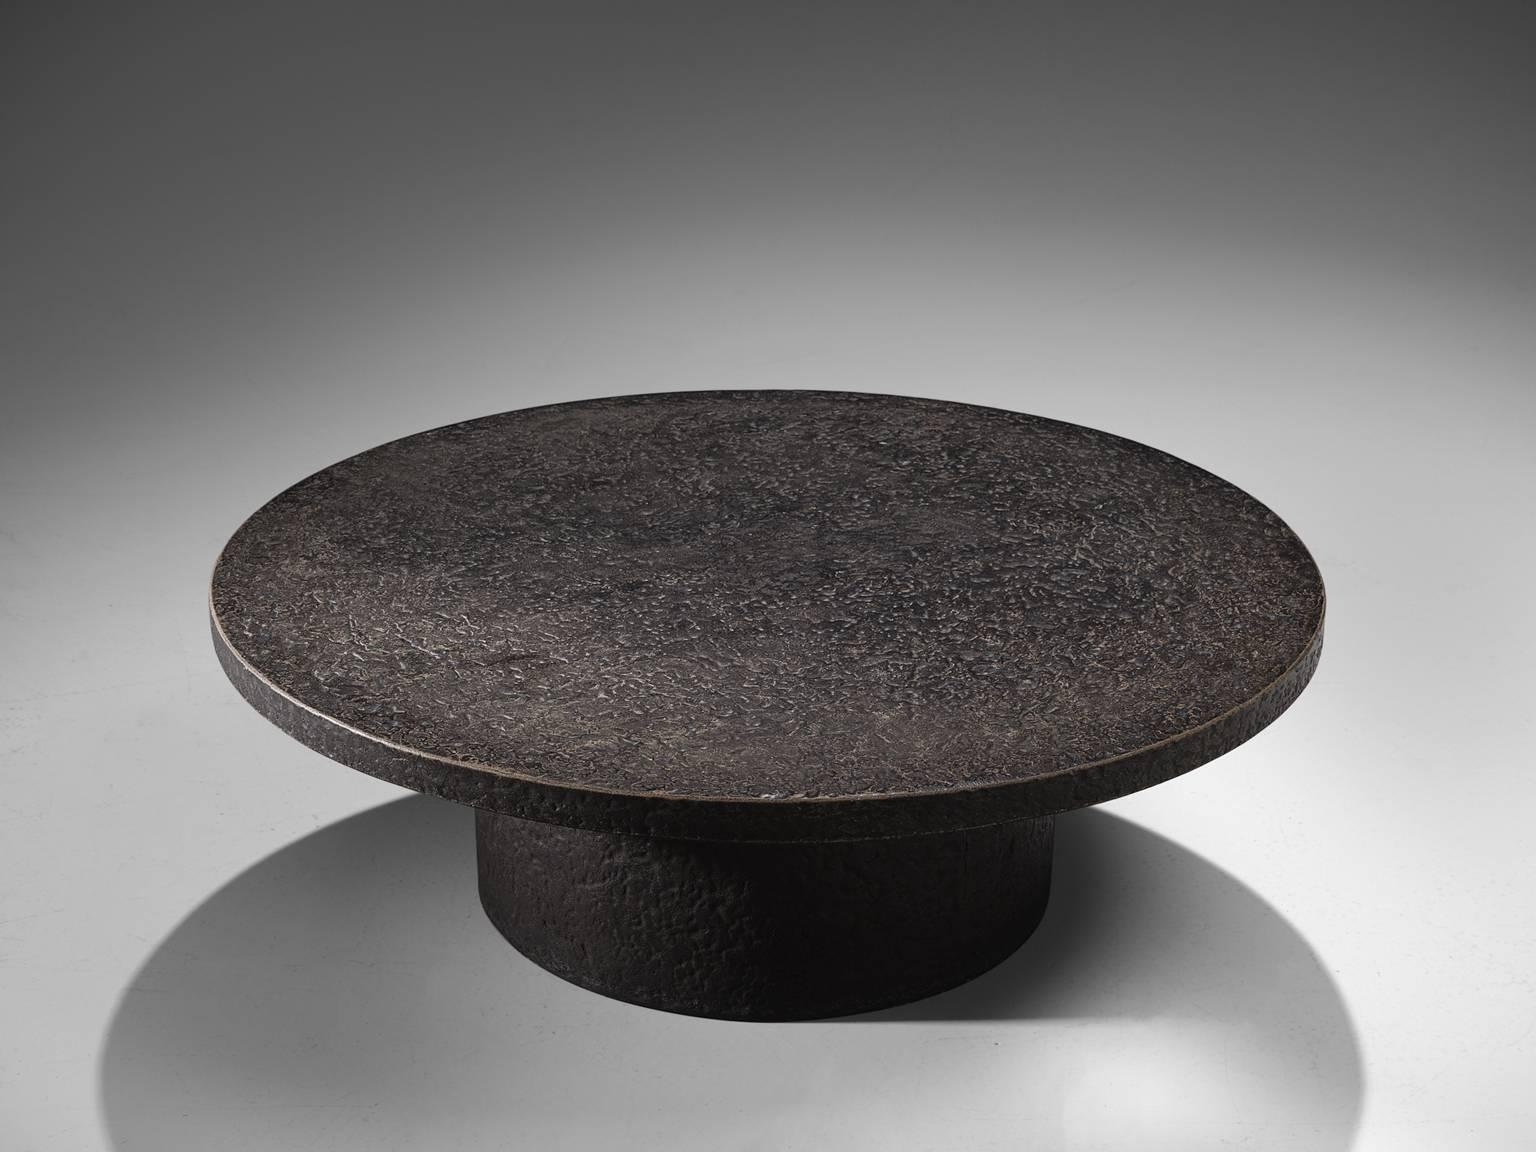 Post-Modern Brutalist Coffee Table with Stone Look